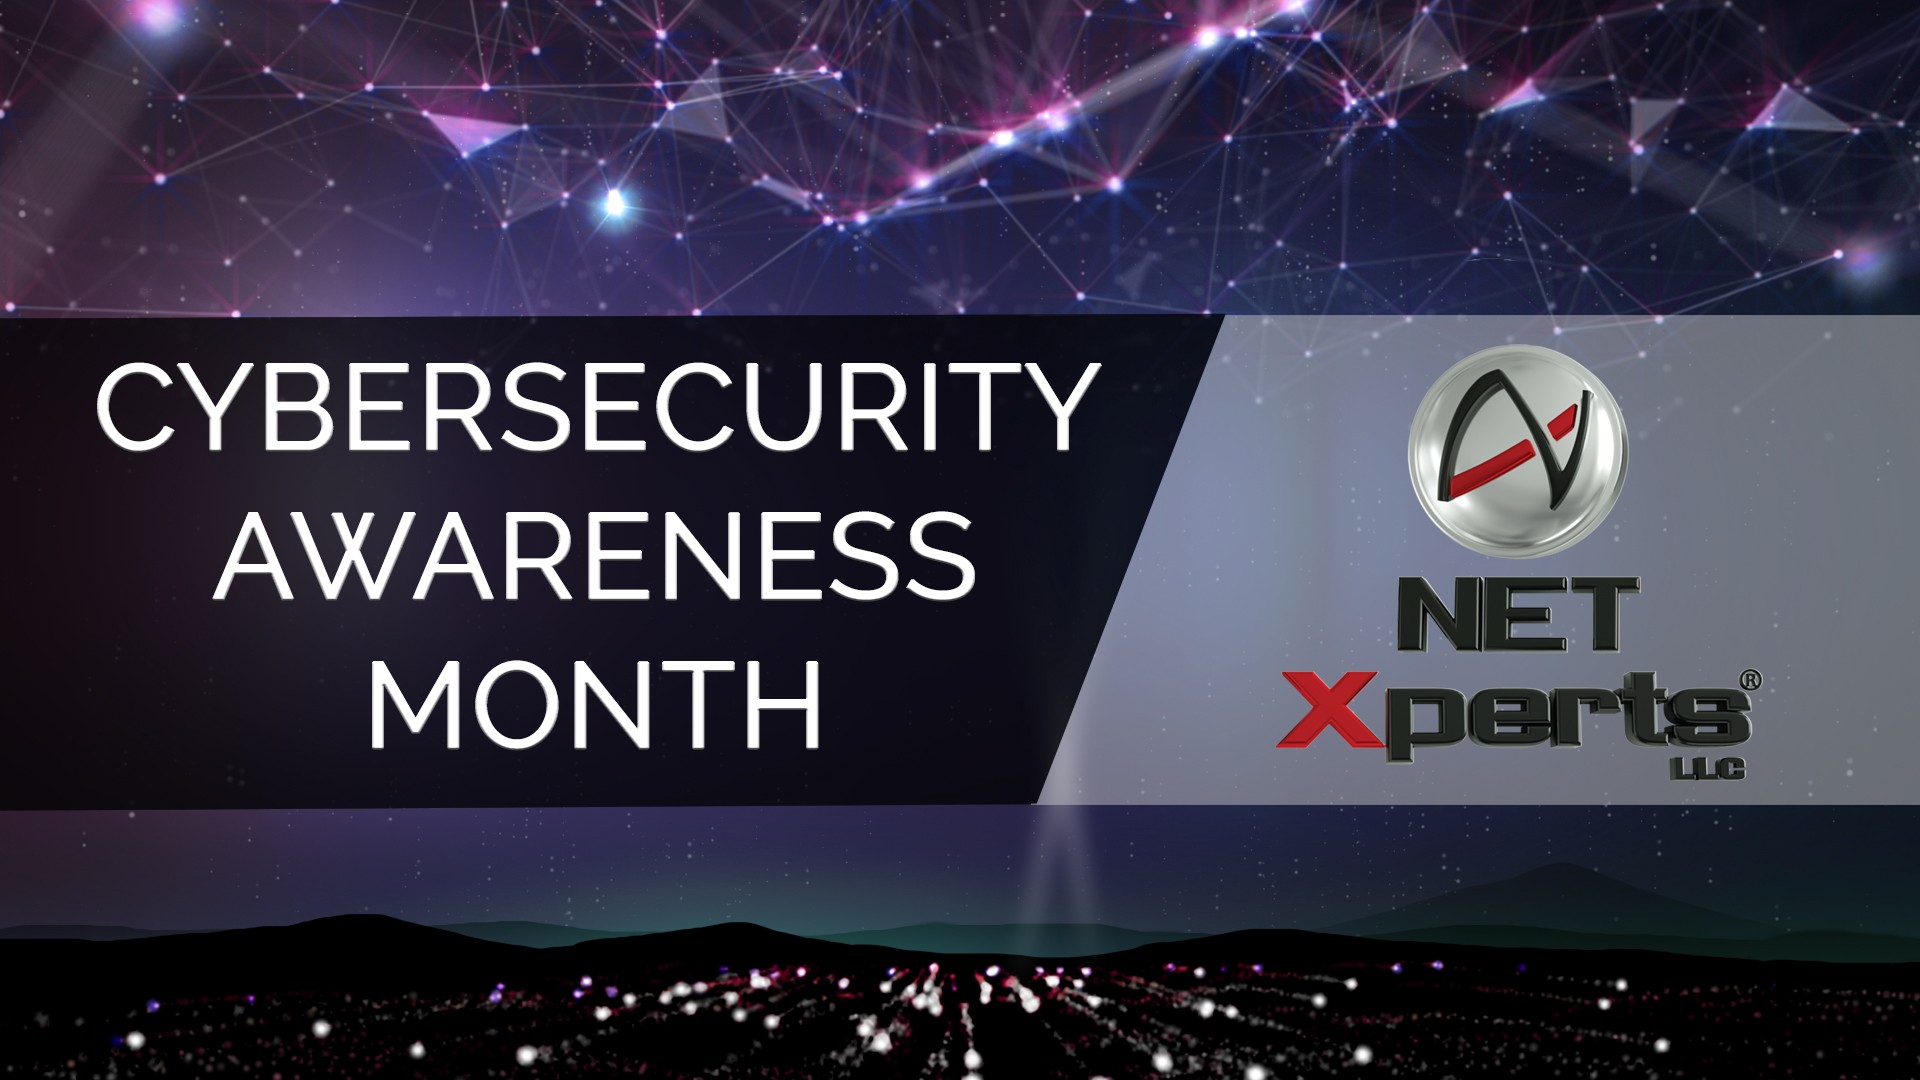 cybersecurity awareness month